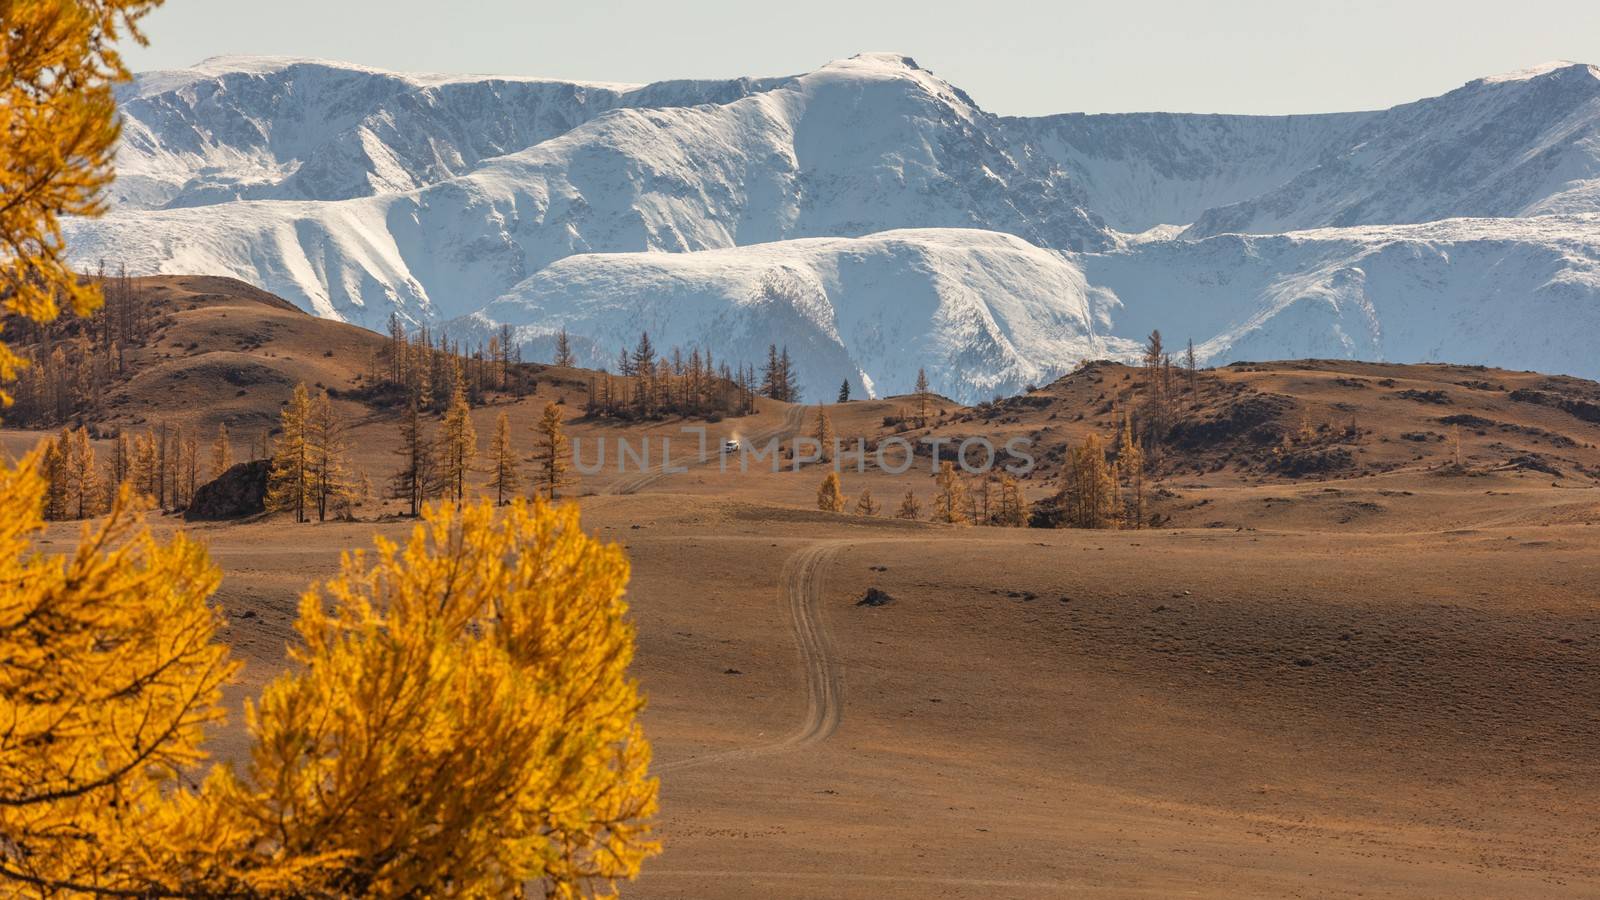 Scenic high angle view of a valley with an off-road vehicle moving in it. White snowy mountain ridge as a background. Golden tree in the foreground out of focus. Altai mountains, Siberia, Russia by DamantisZ